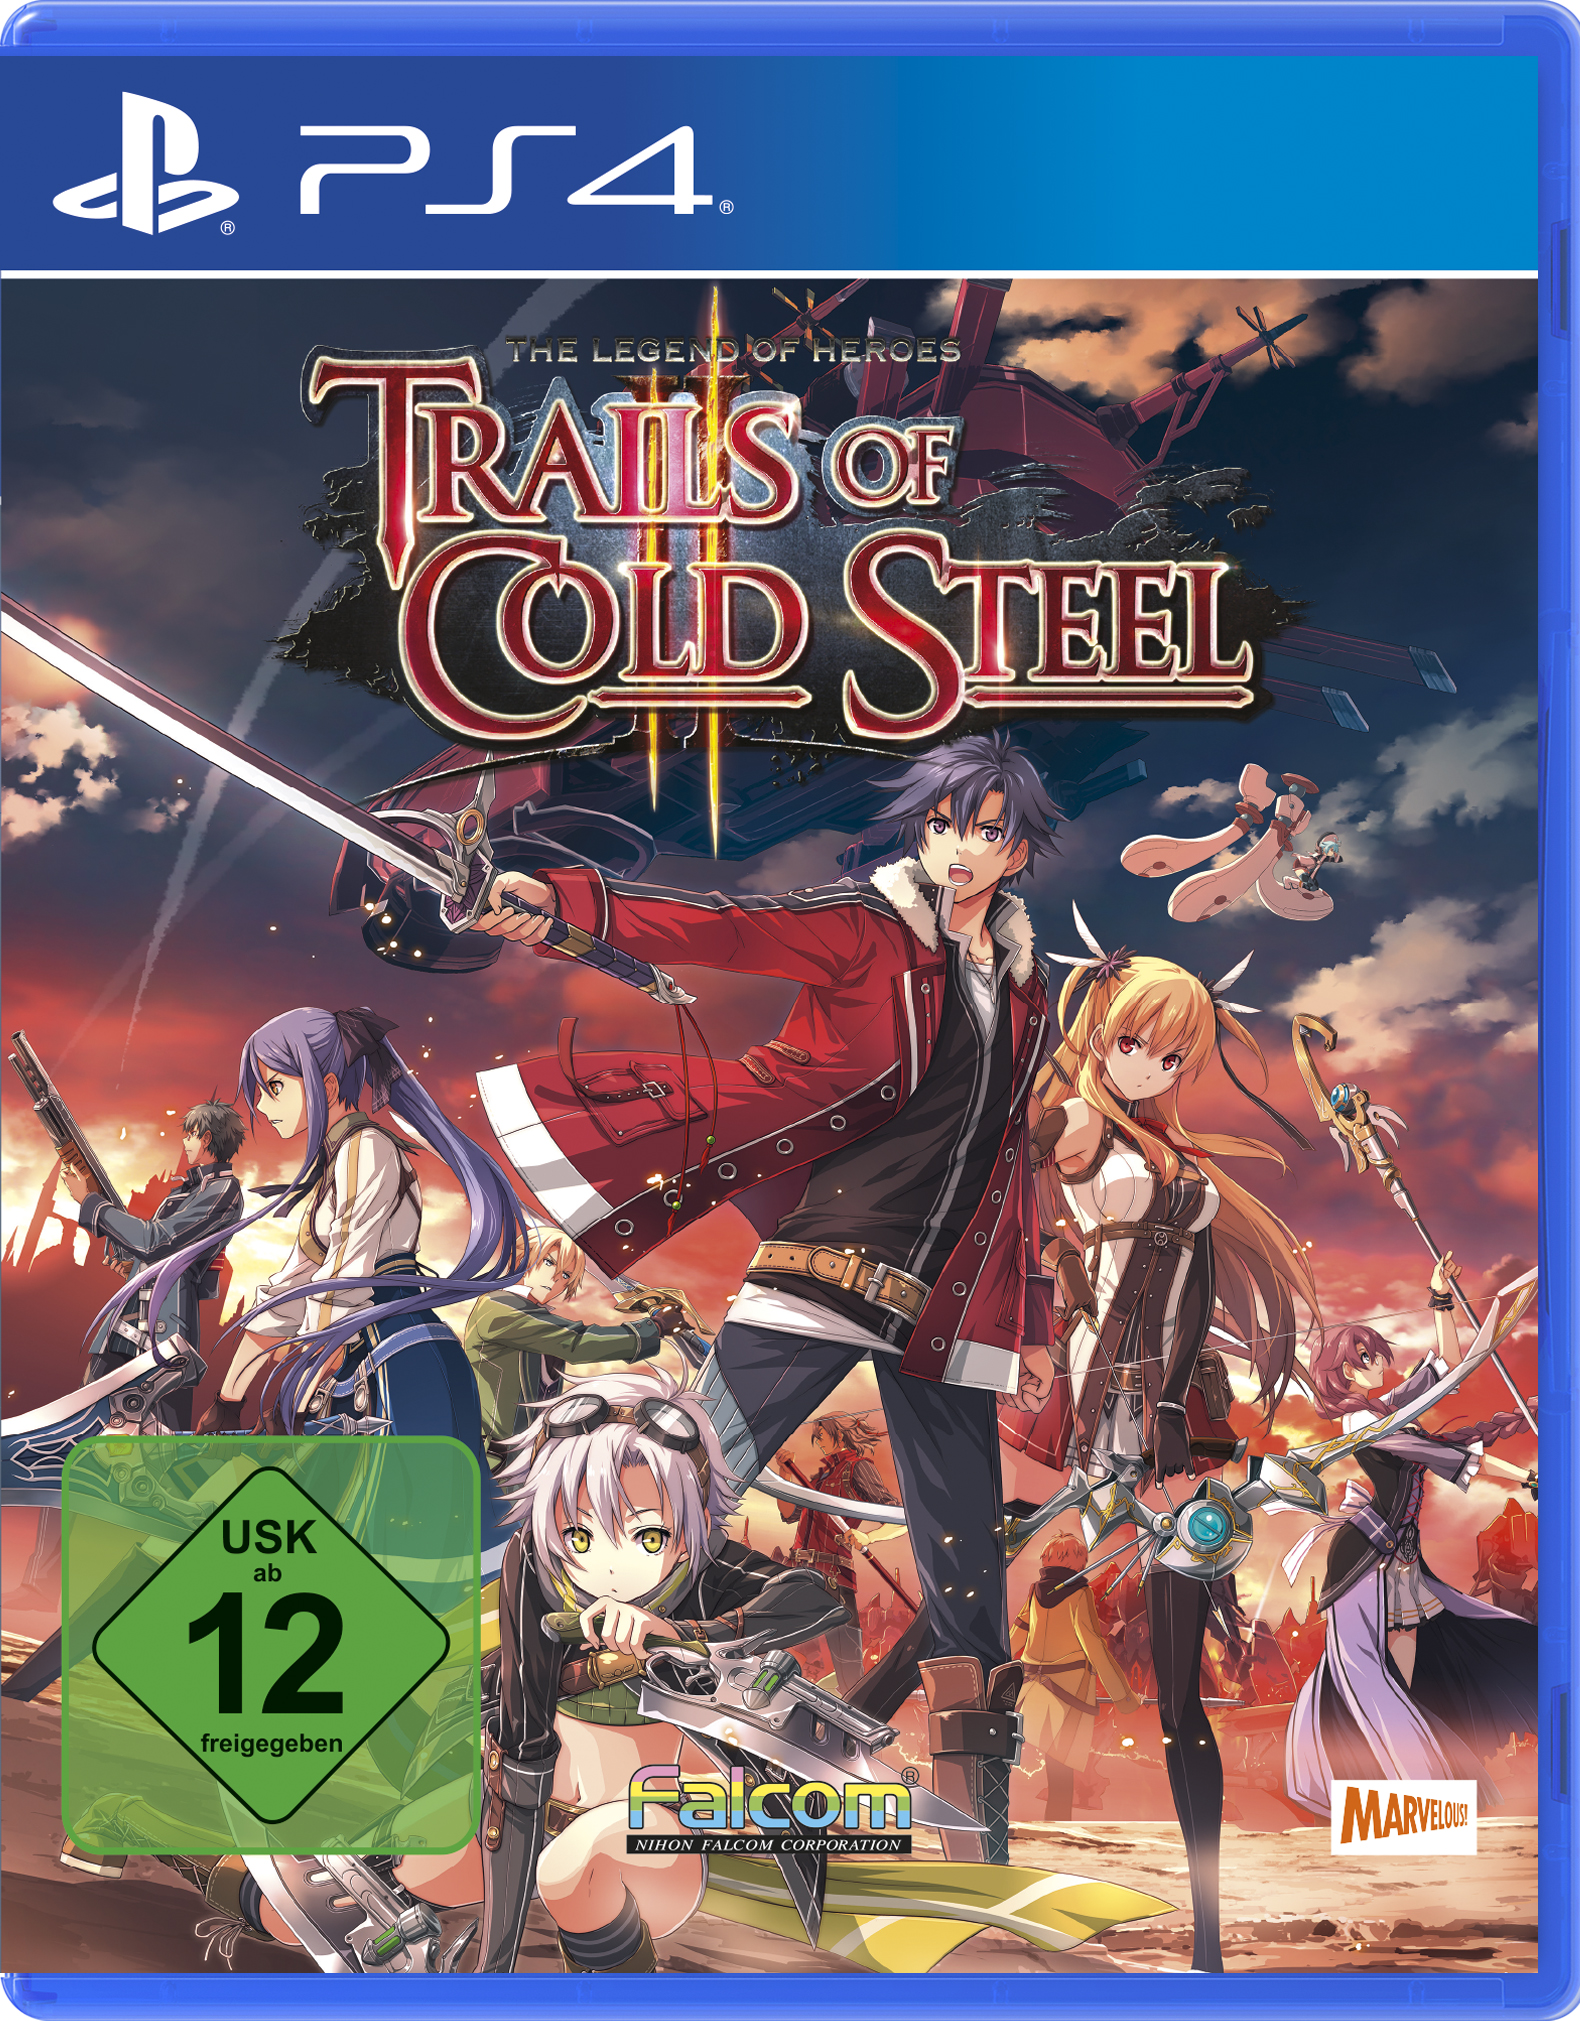 The Legend of Trails 2 - [PlayStation Heroes: of Steel 4] Cold